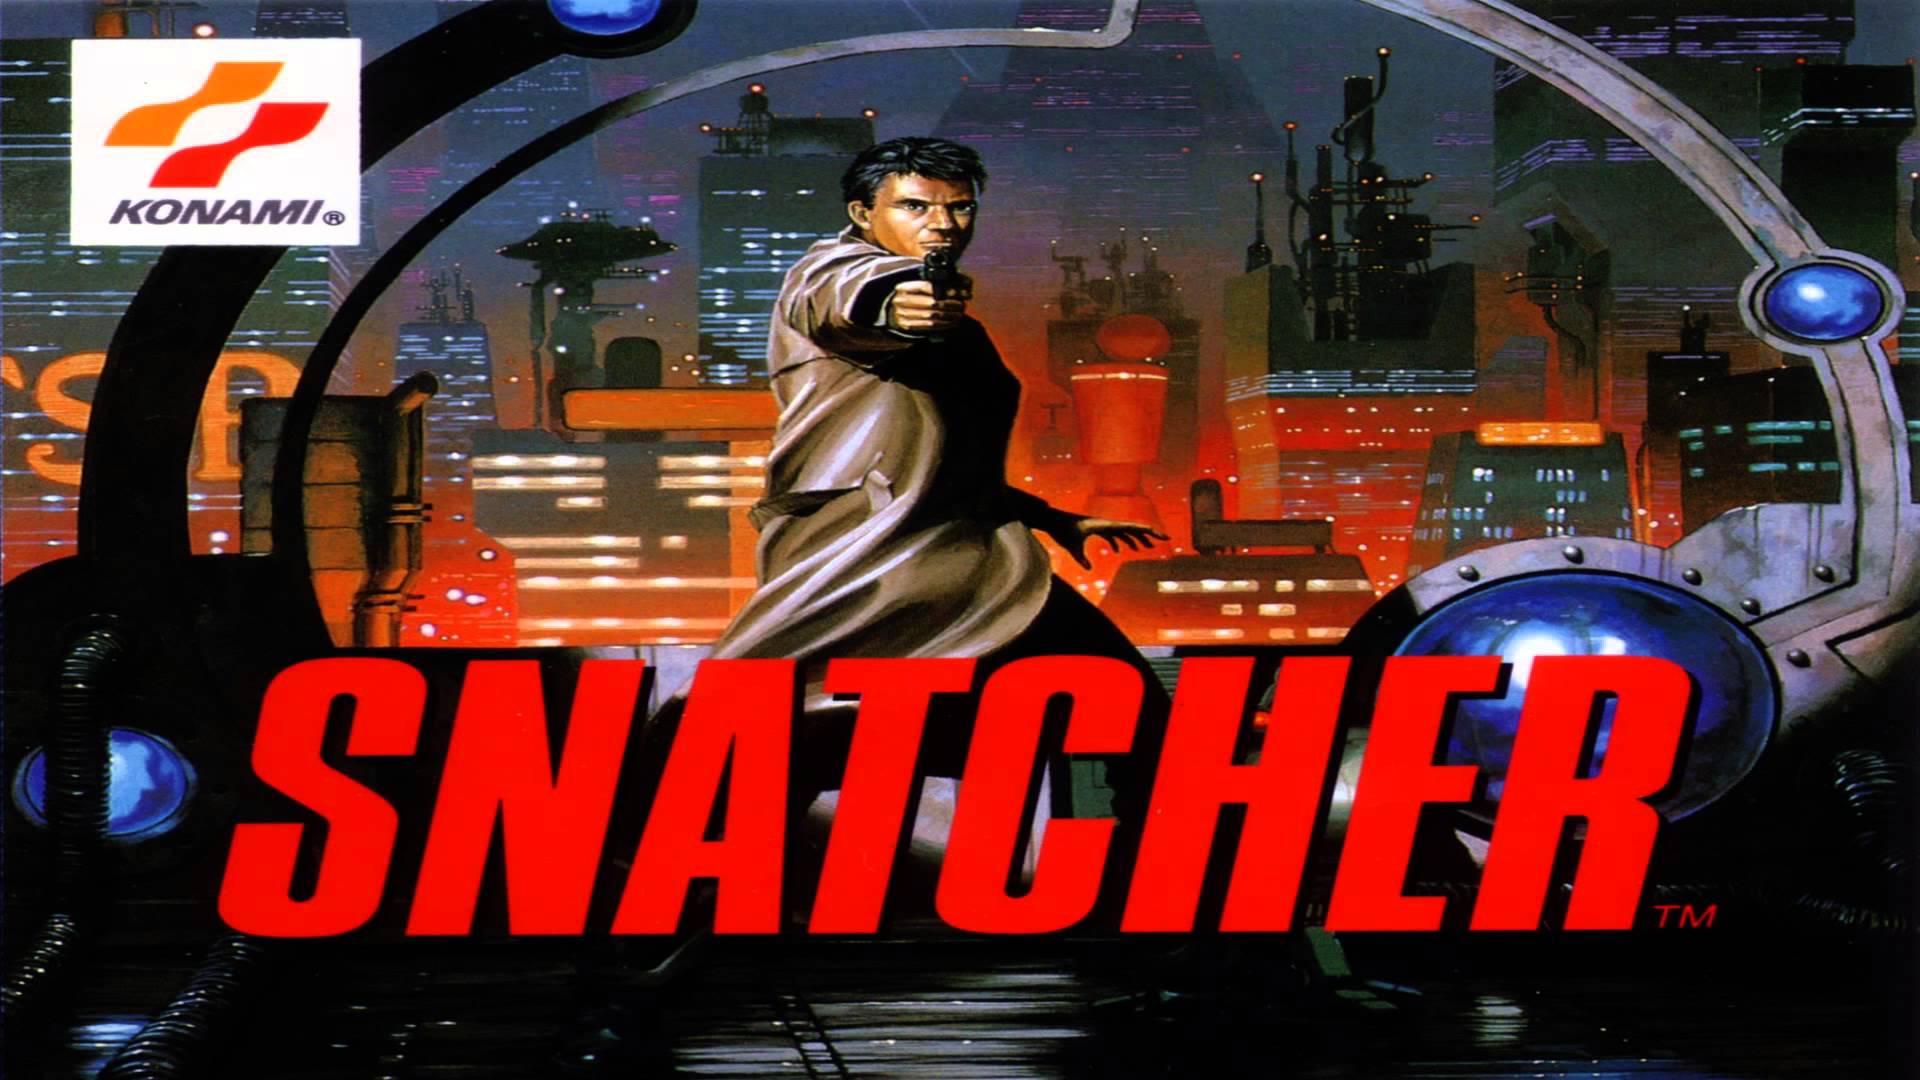 Snatcher Game Cover